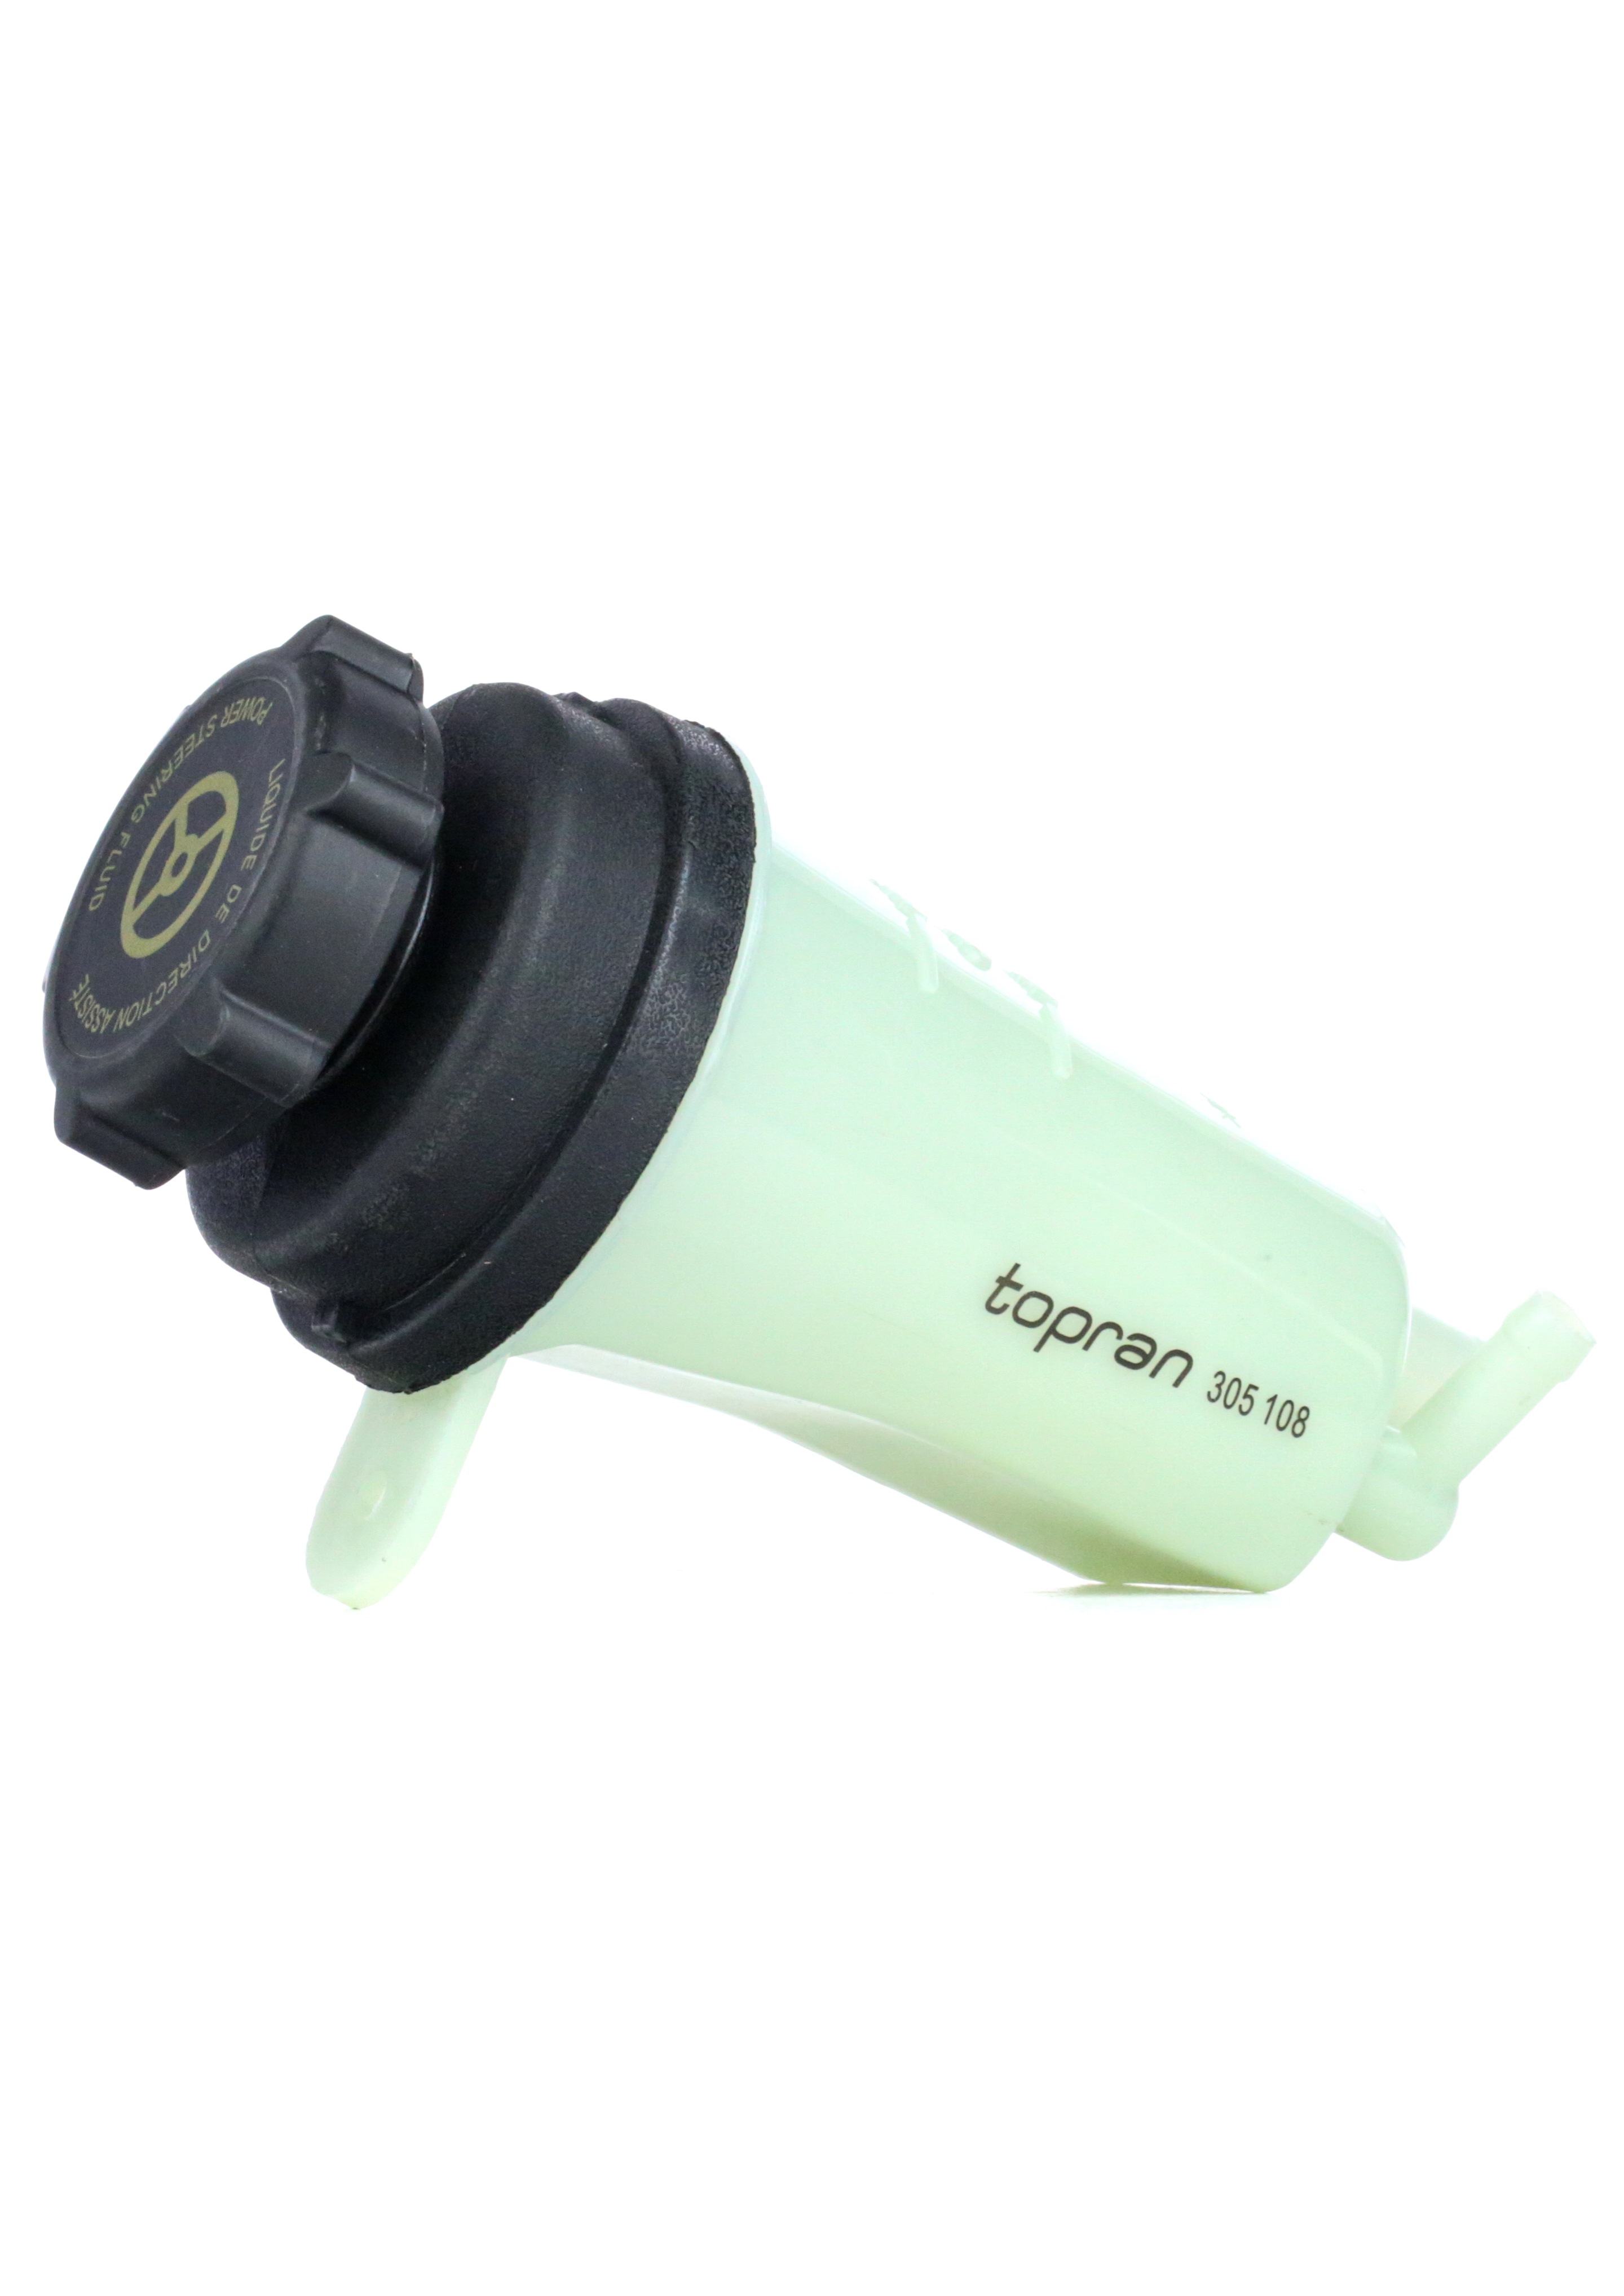 Volvo Expansion Tank, power steering hydraulic oil TOPRAN 305 108 at a good price